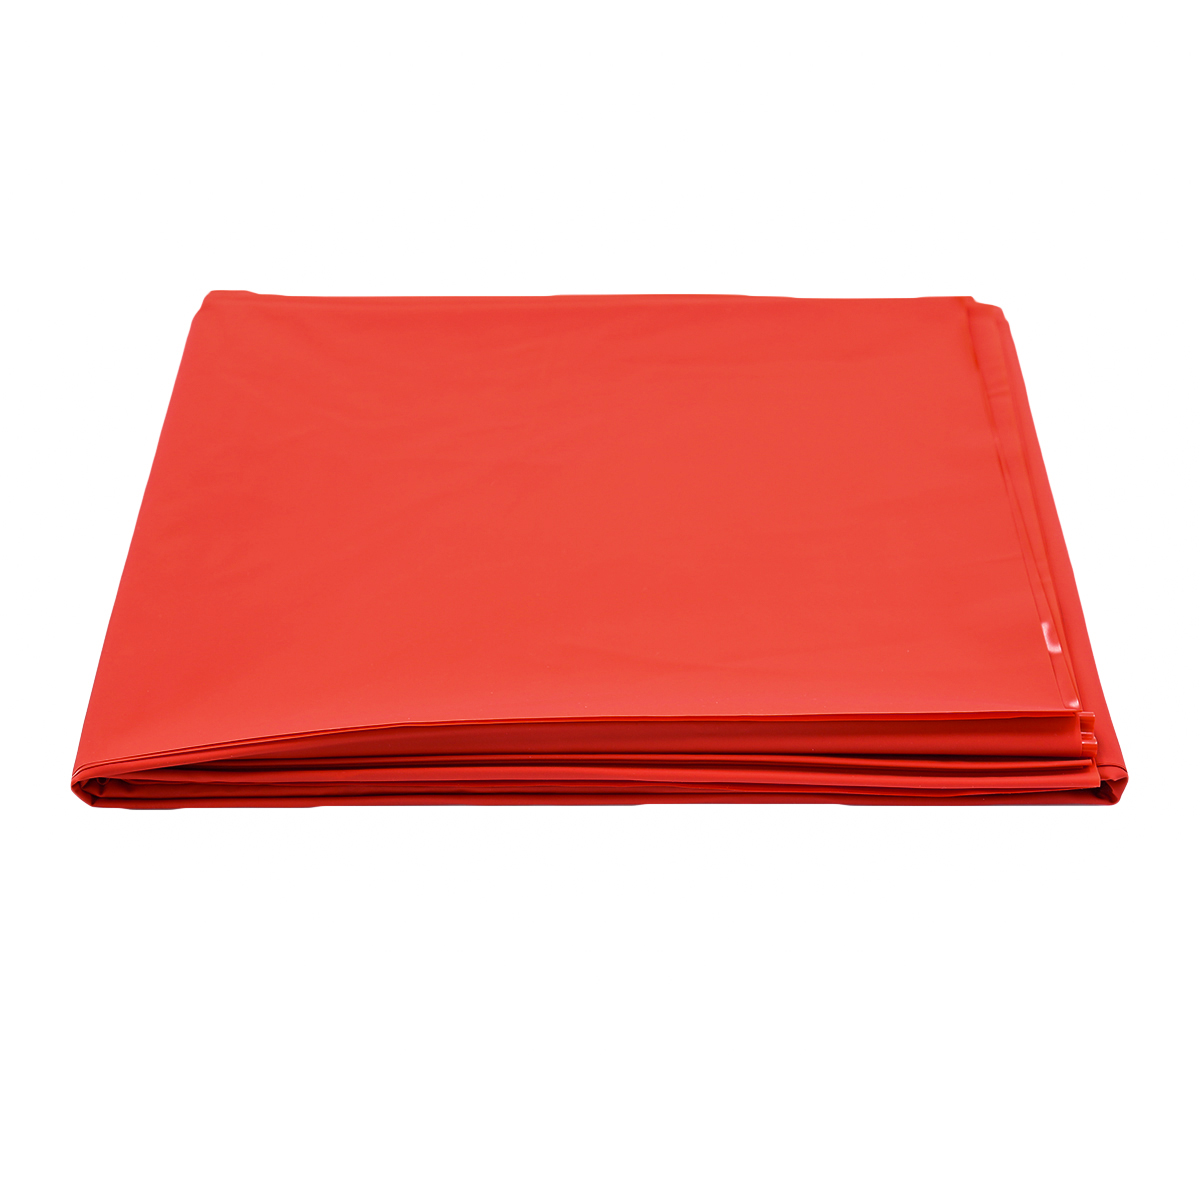 Bed-Sheet-Cover-Red-OPR-321040-3